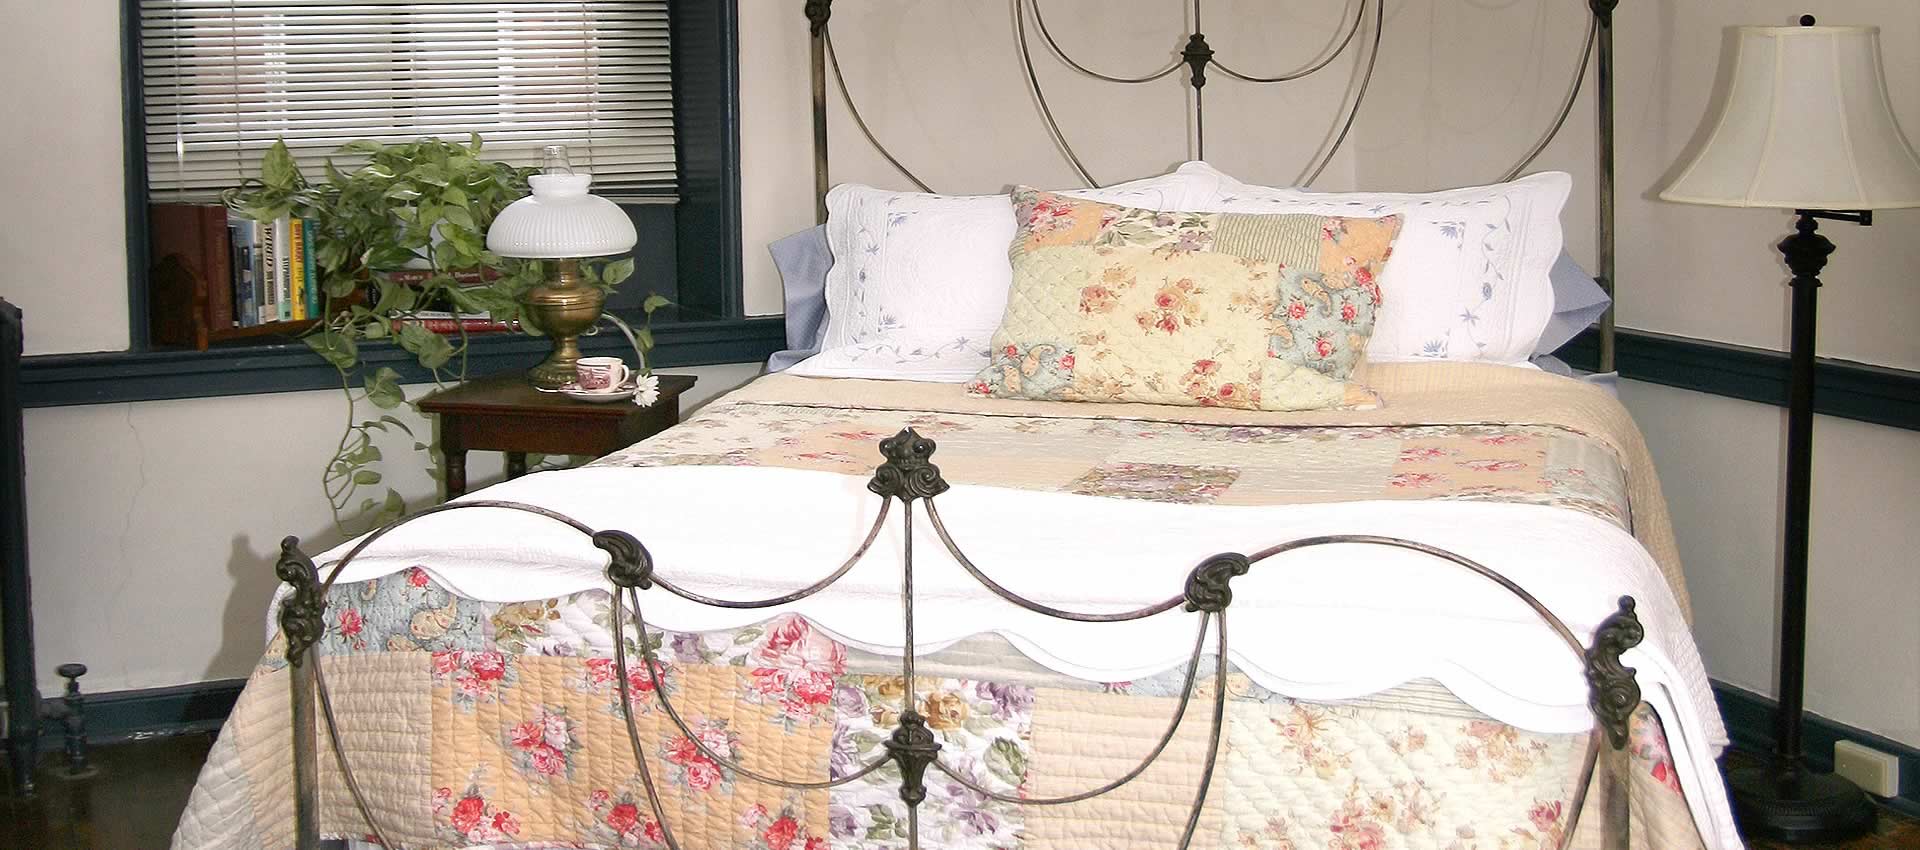 the bed of the Michael Hoke room with table and lamp